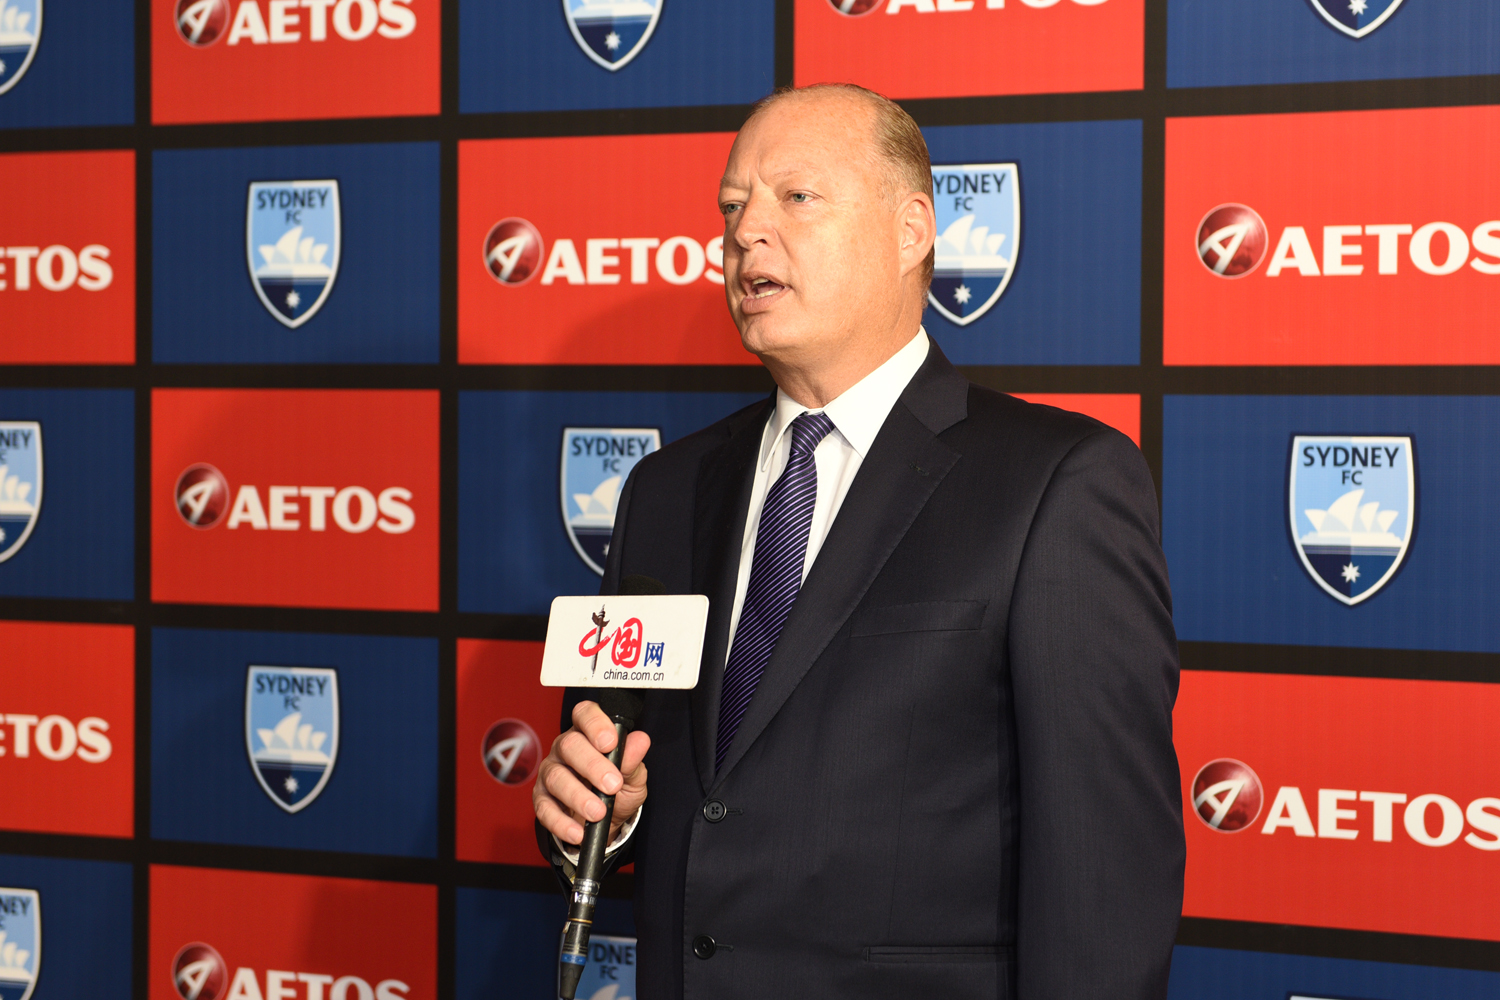 Councillor Mike Thomas said AETOS was so delighted to meet its social responsibilities through support and investment in Australian football club.    